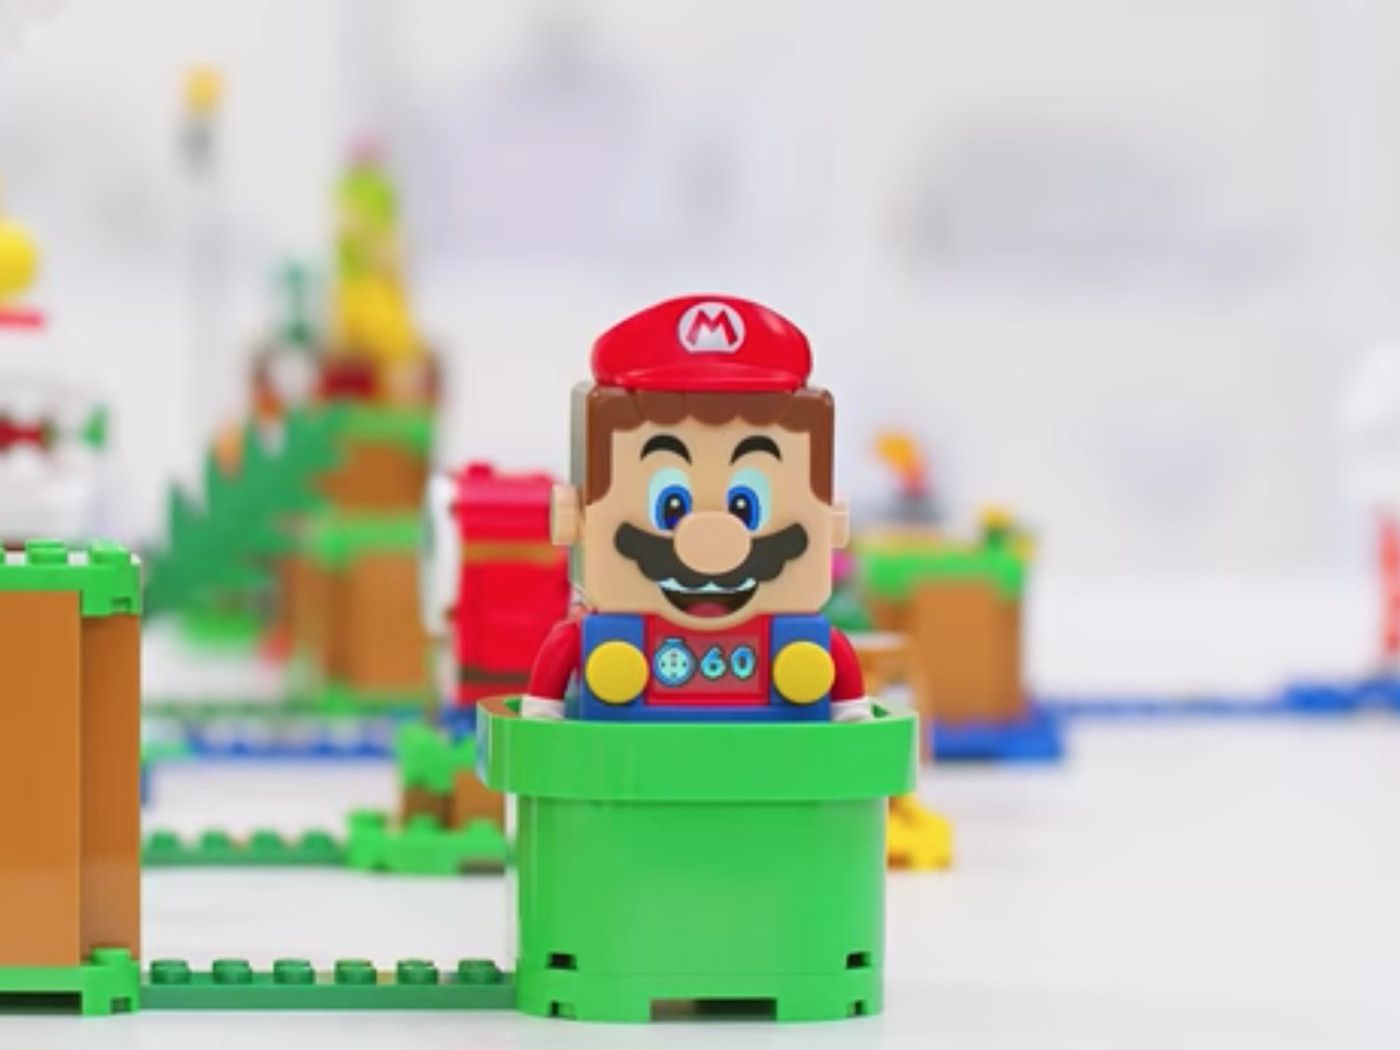 Nintendo's first Lego set is a playable 'Super Mario' game